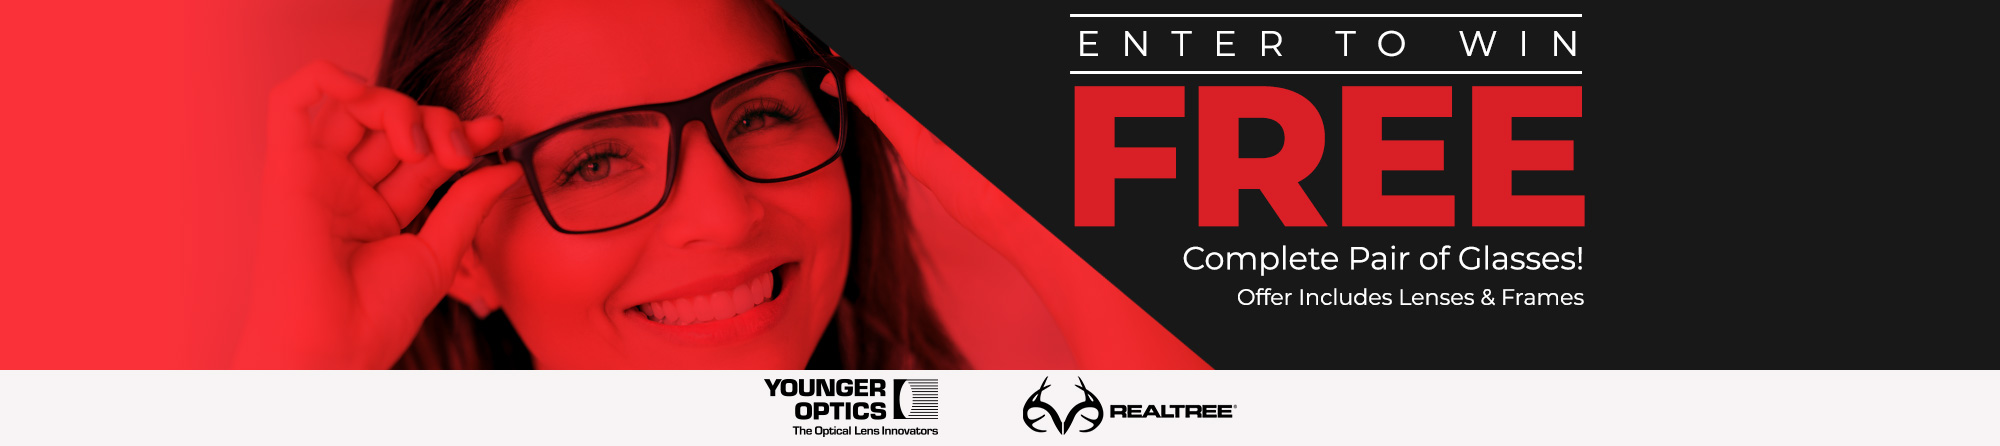 Enter to win free glasses